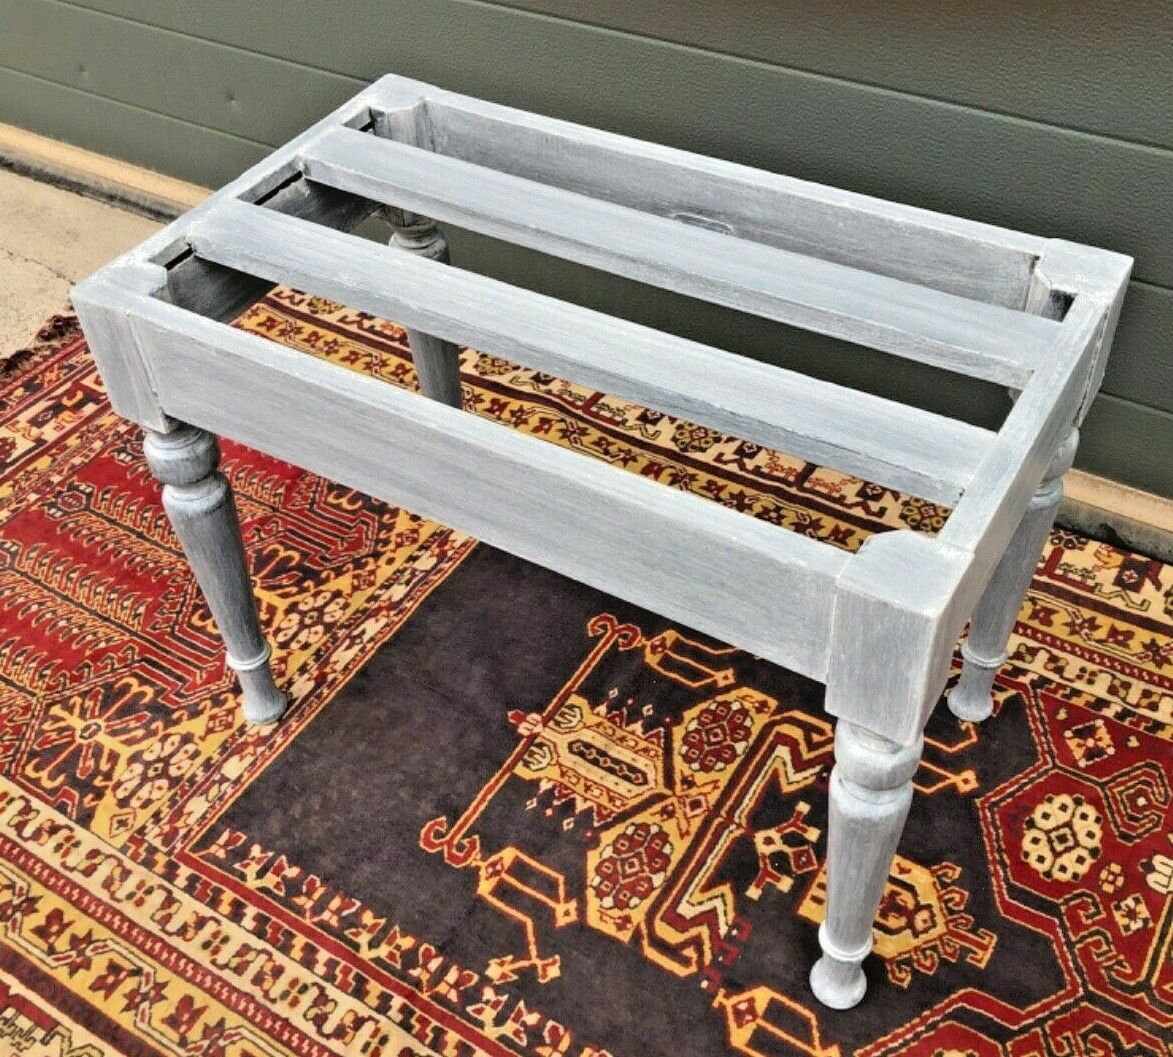 Antique Luggage Stand / Refinished Suitcase Rack ( SOLD )